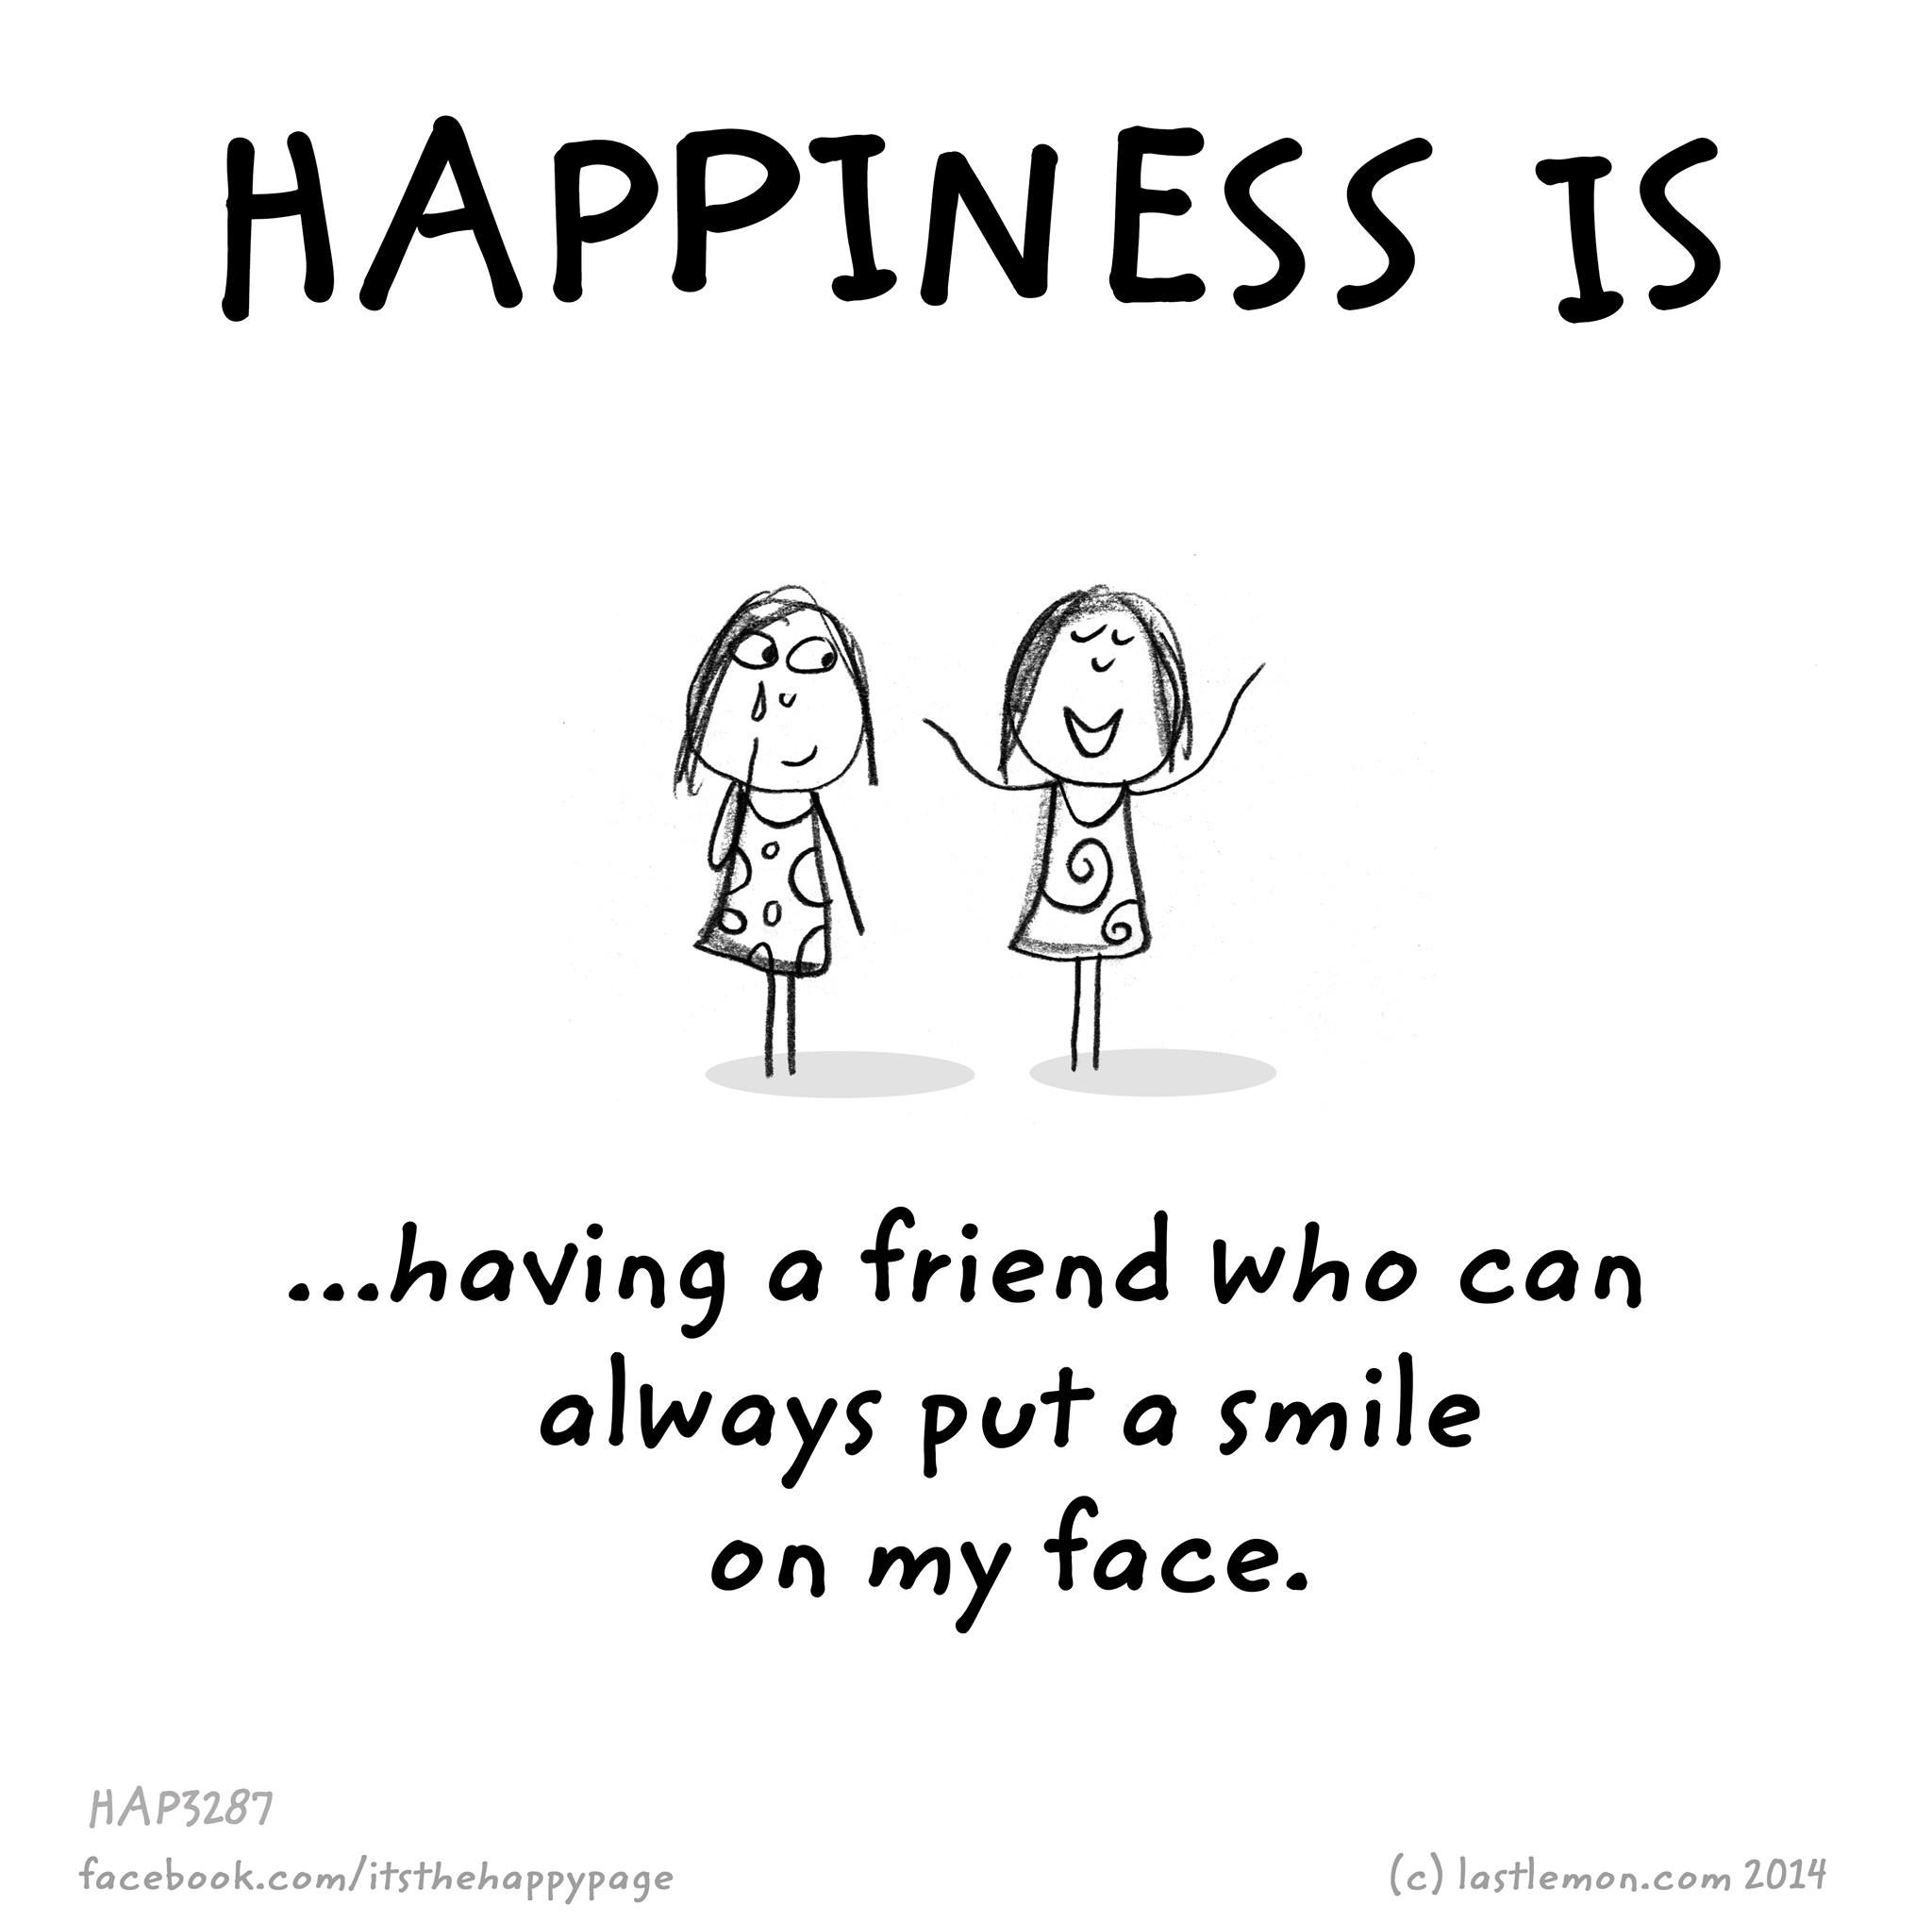 friendship | nice quotes | Pinterest | Friendship, Happiness and Qoutes